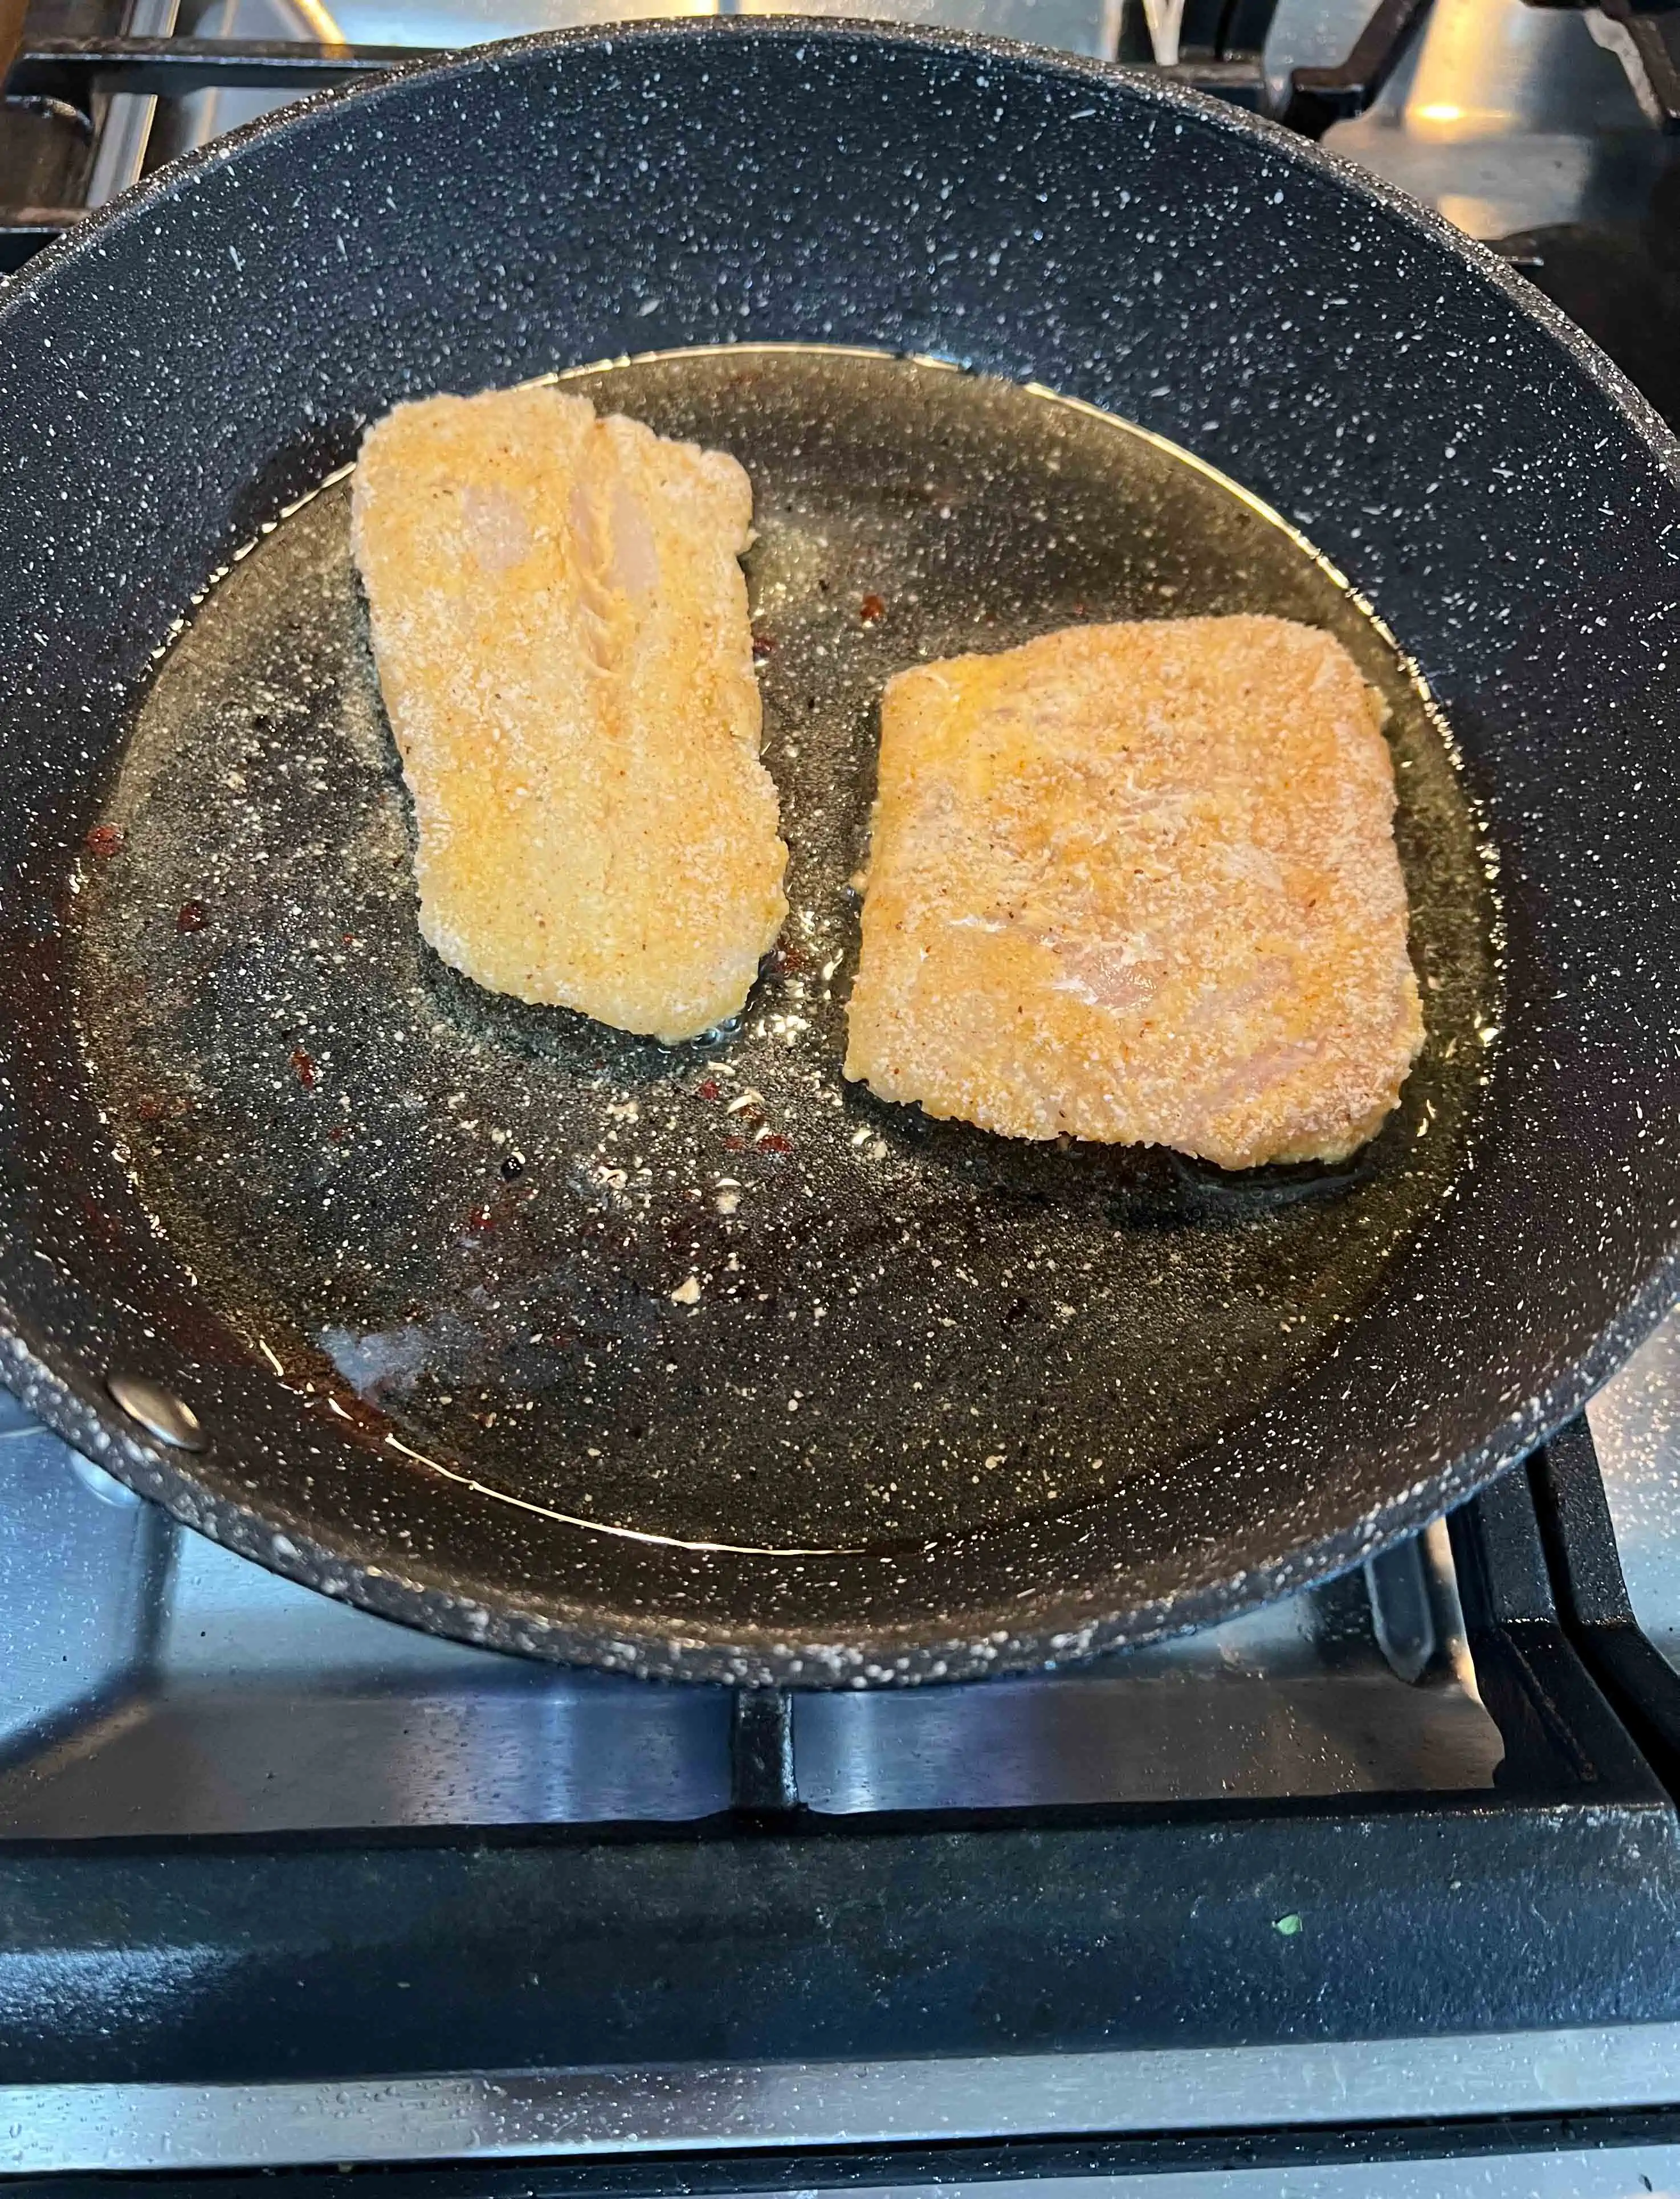 Shallow frying the cod in oil in a skillet.